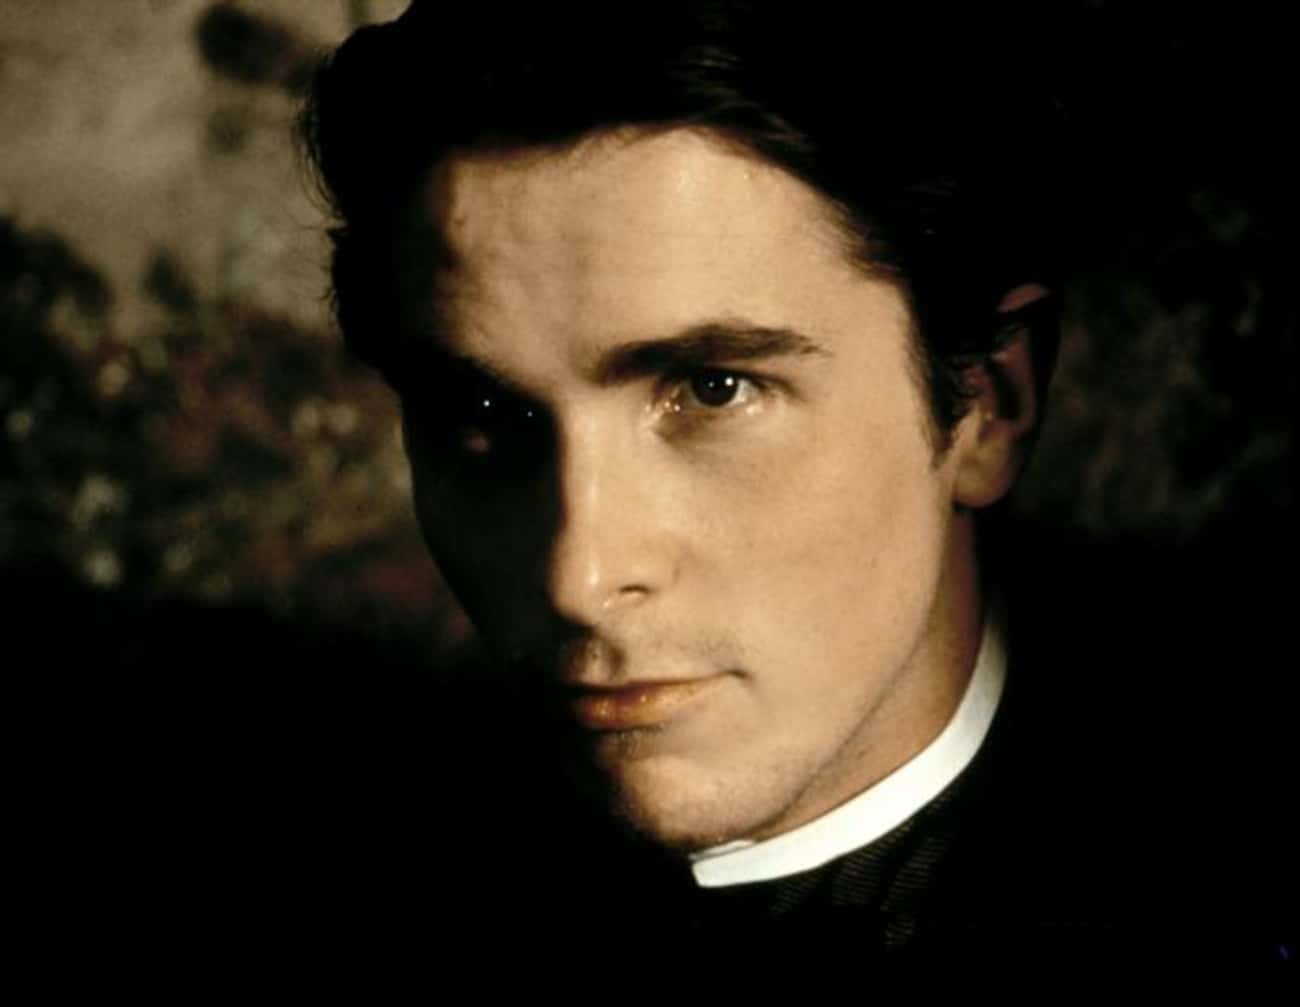 Young Christian Bale in Black Coat with White Collar Closeup